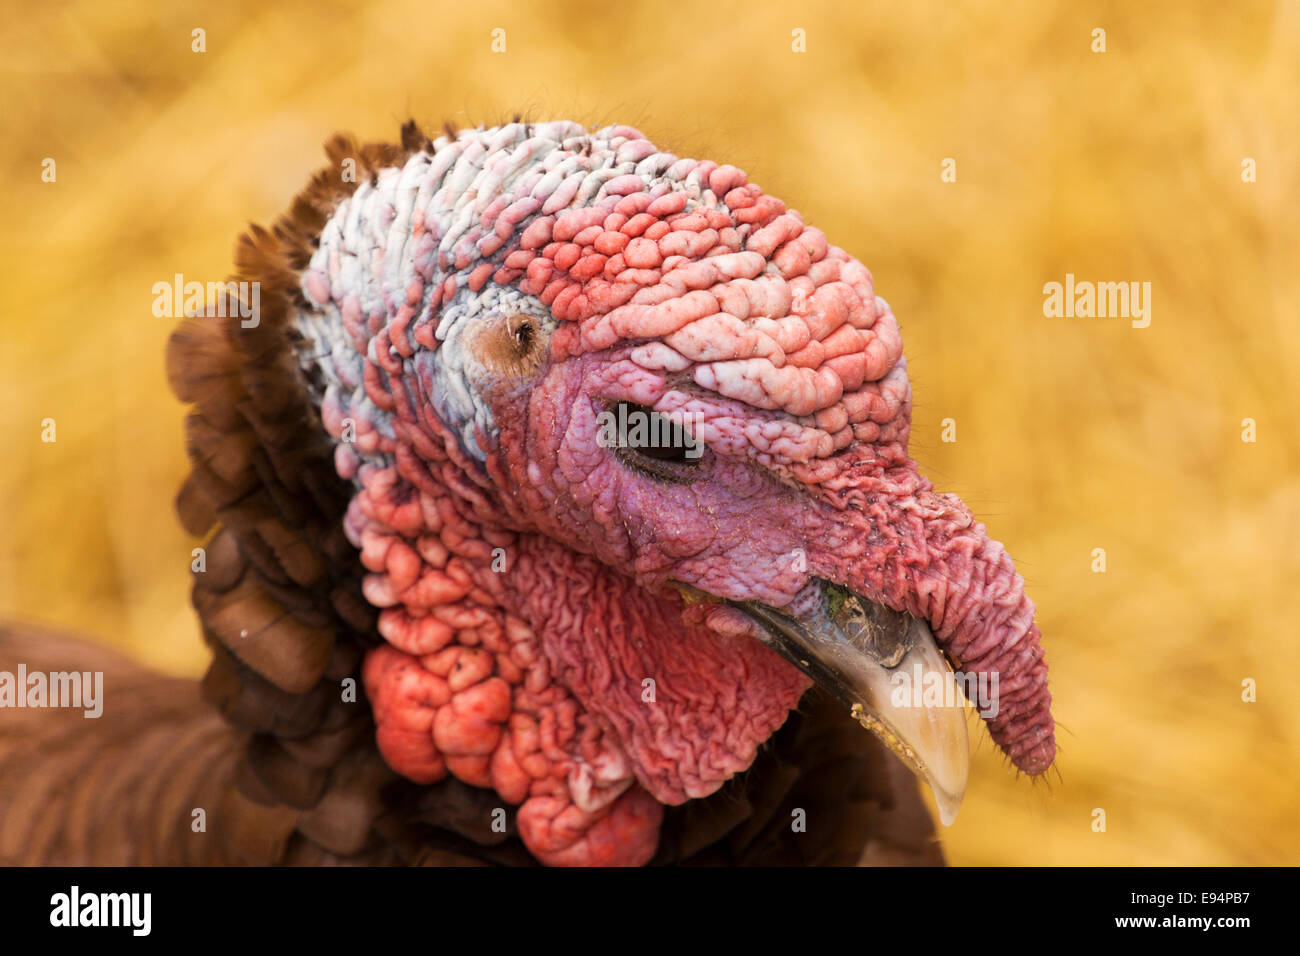 Close-up of a live Wild Turkey head. The turkey lives on a farm in northern Illinois, USA. Stock Photo